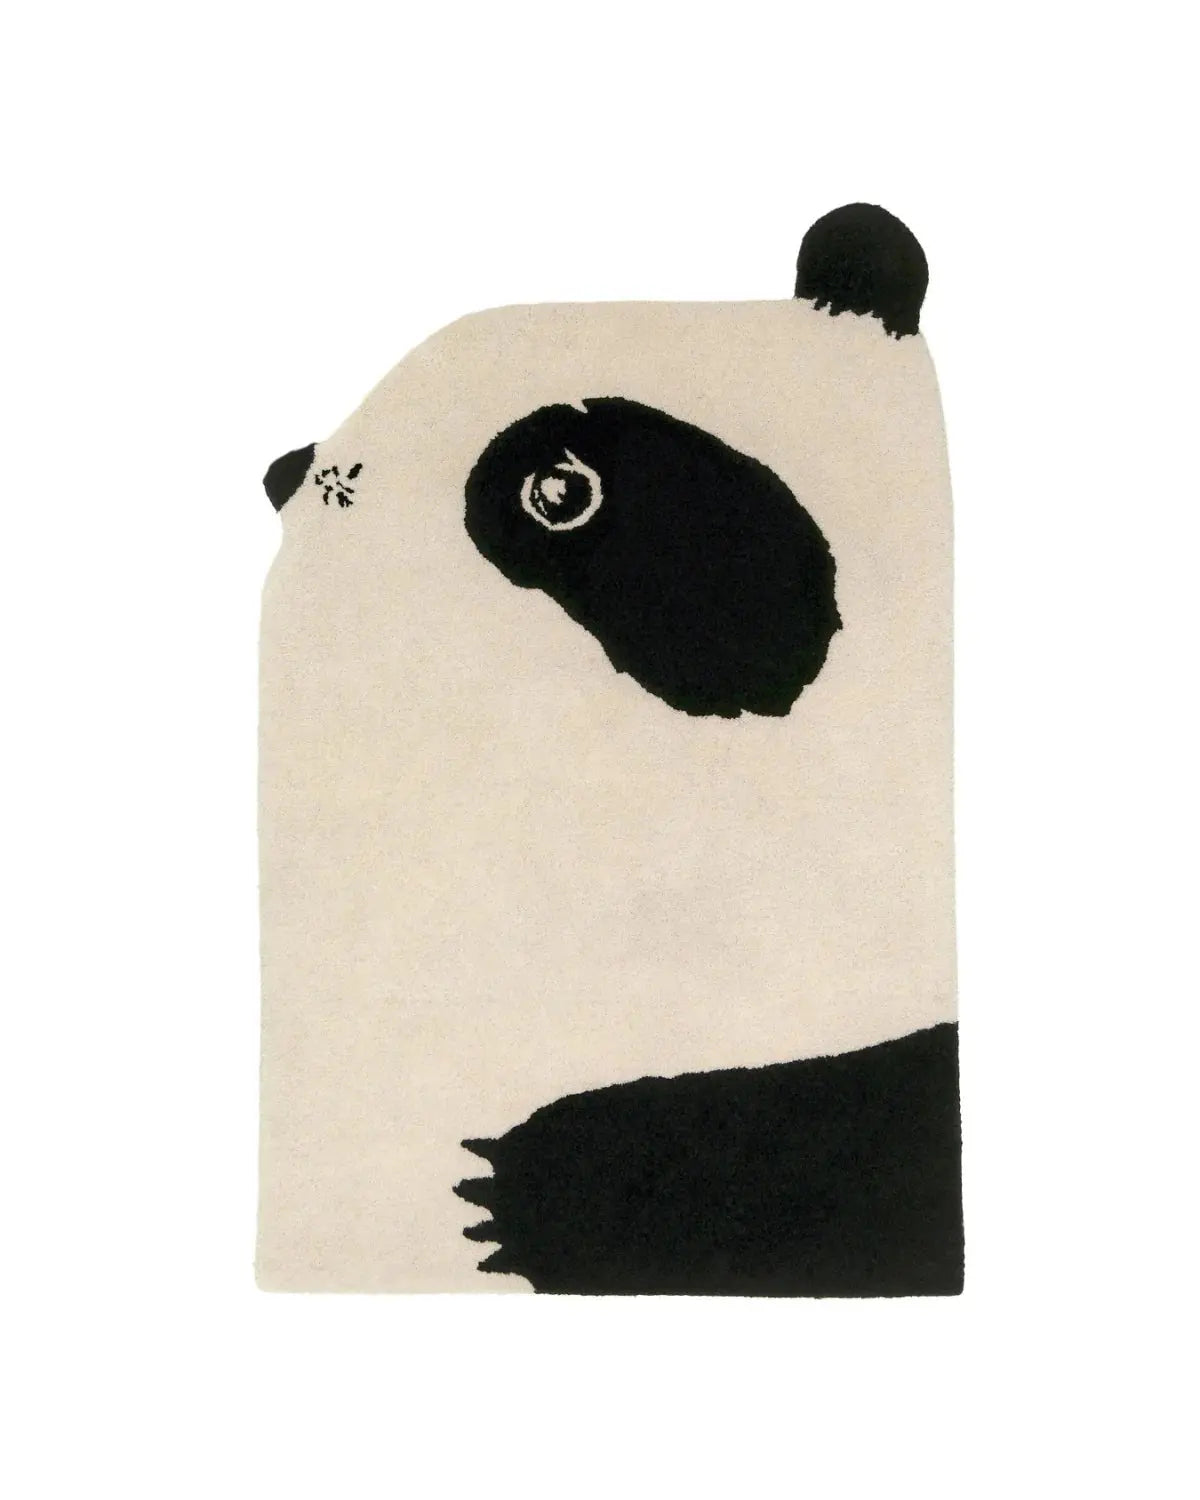 Rug Panda5. Panda Rug, Handmade with Soft Thick Wool, Precise Colors and Details, Unique Home Decor  EO Play   